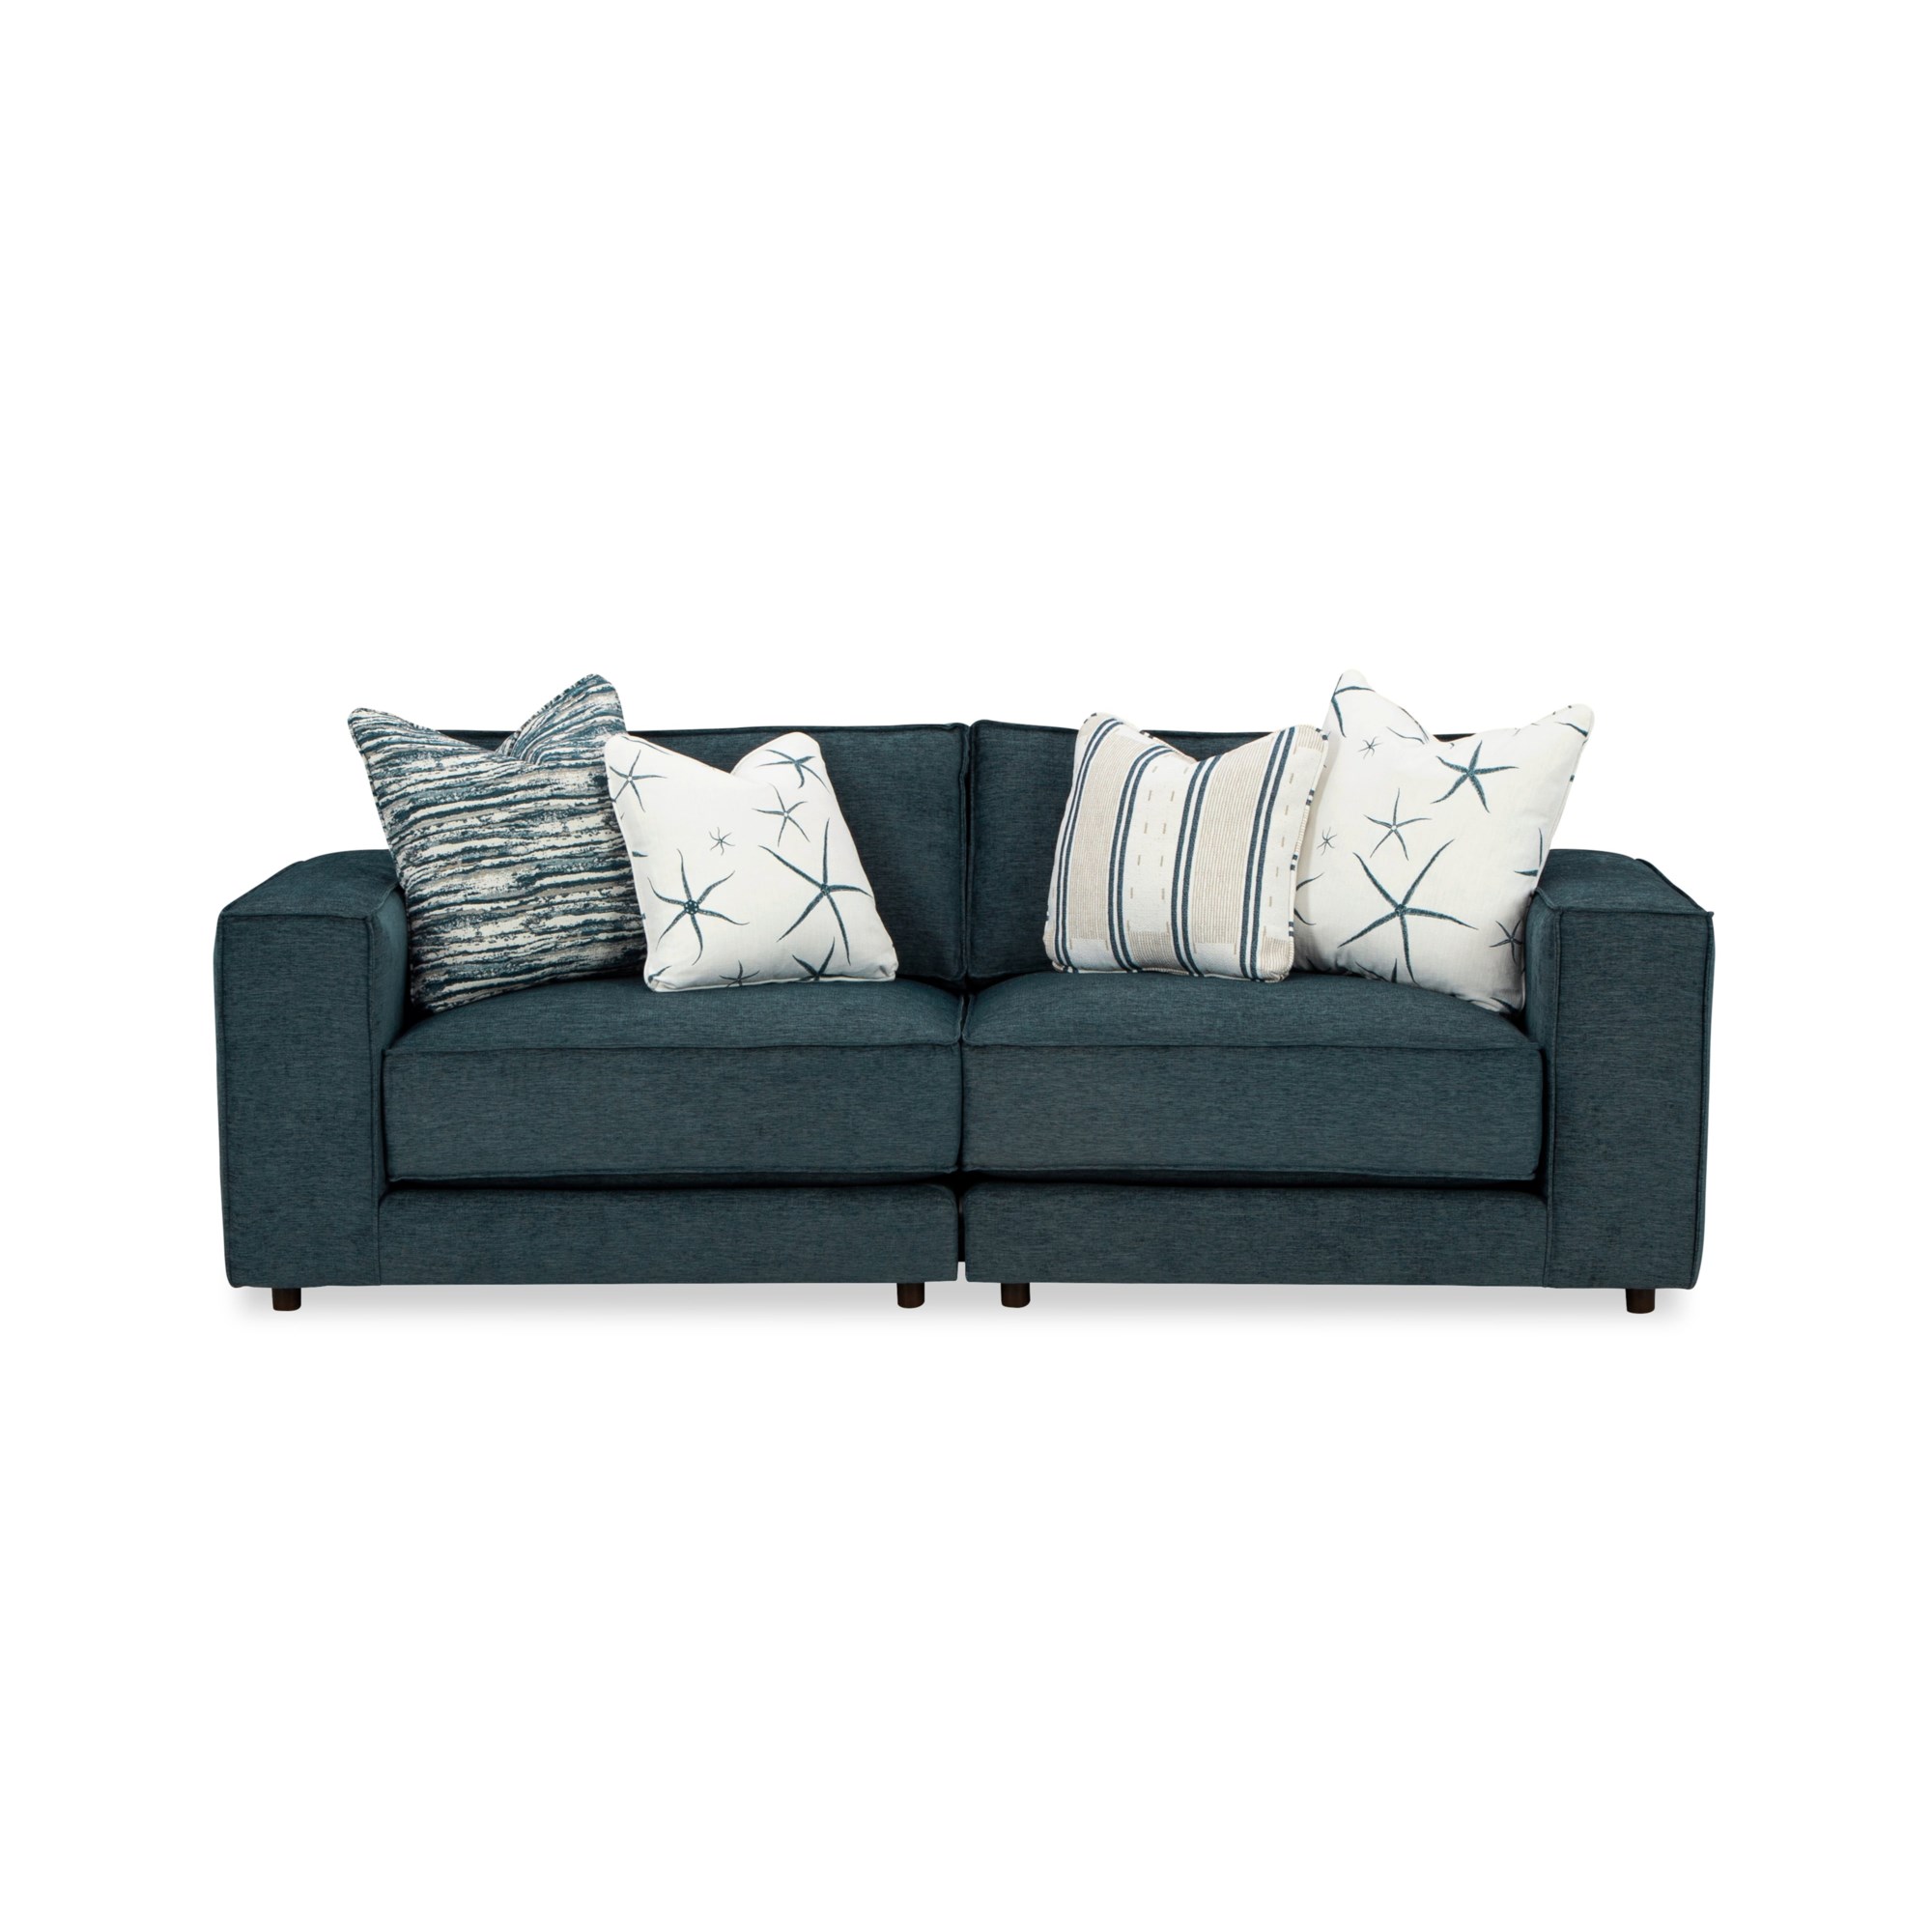 Furniture Seats Craftmaster Sofa Uph - 2 | | with Stationary ROBBIE-23 Collections Modular Sofas Home 734801BD 734819BDx1+734818BDx1 Contemporary